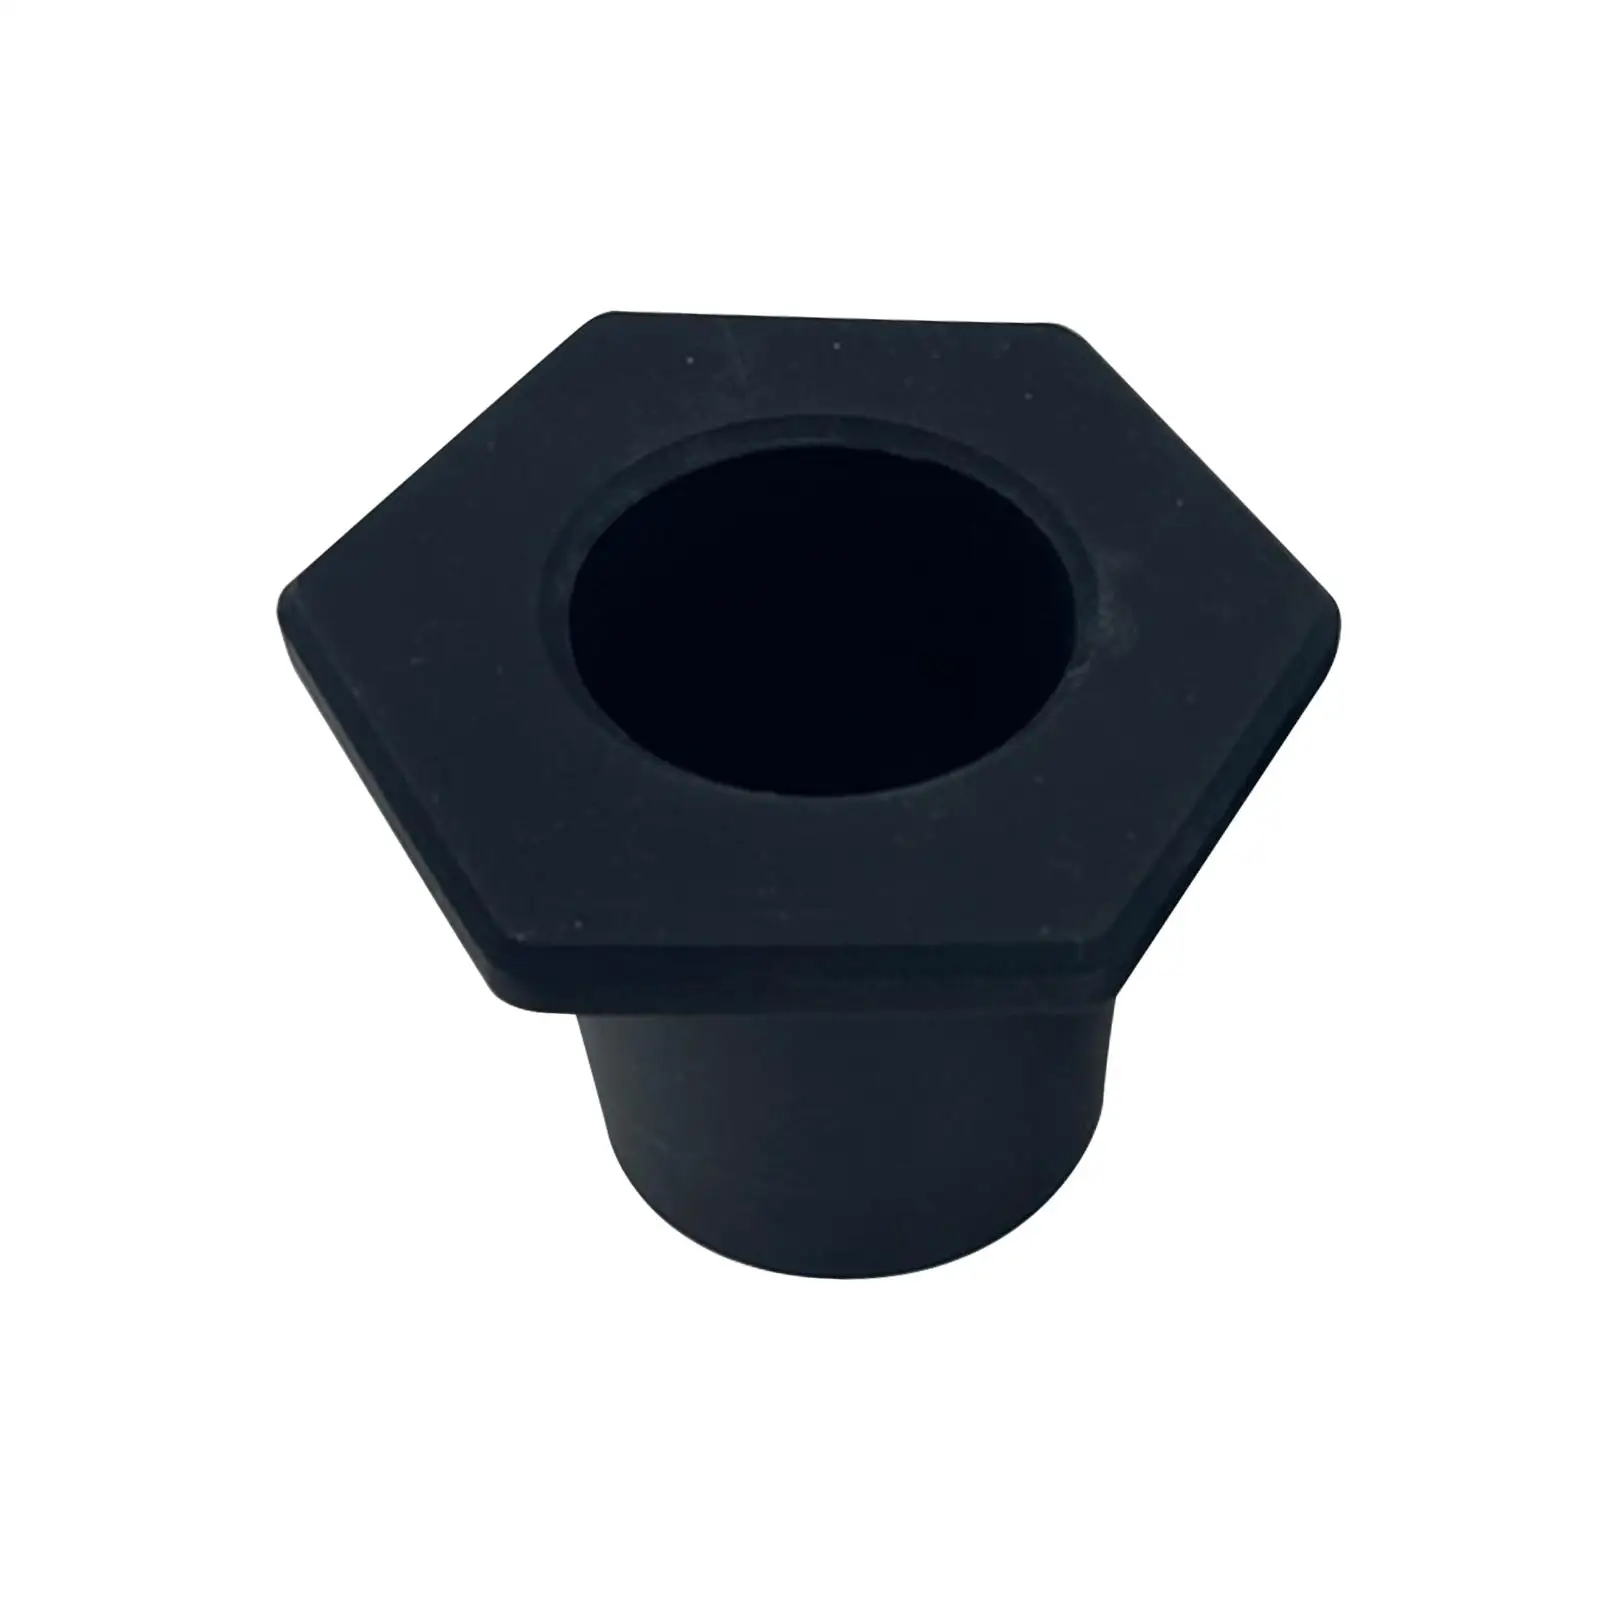 Umbrella Cone Wedge Plug Replace Multipurpose Fittings Simple Using Table Umbrella Hole Ring for Outdoor Terrace Parasol Camping